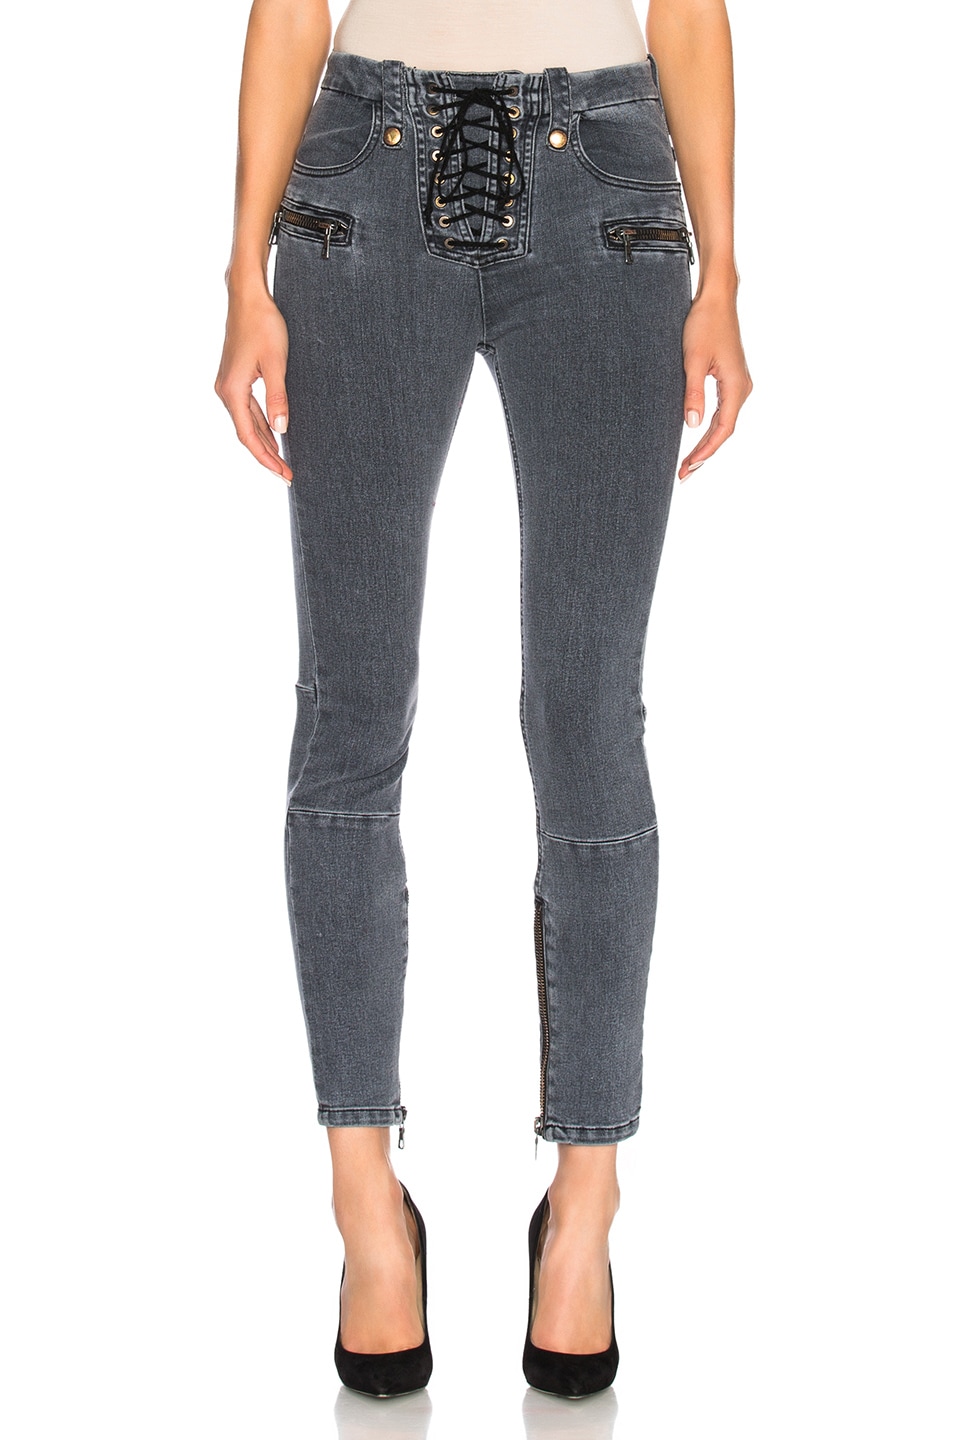 Image 1 of Unravel for FWRD Lace Up Skinny Jeans in Stone Wash Grey